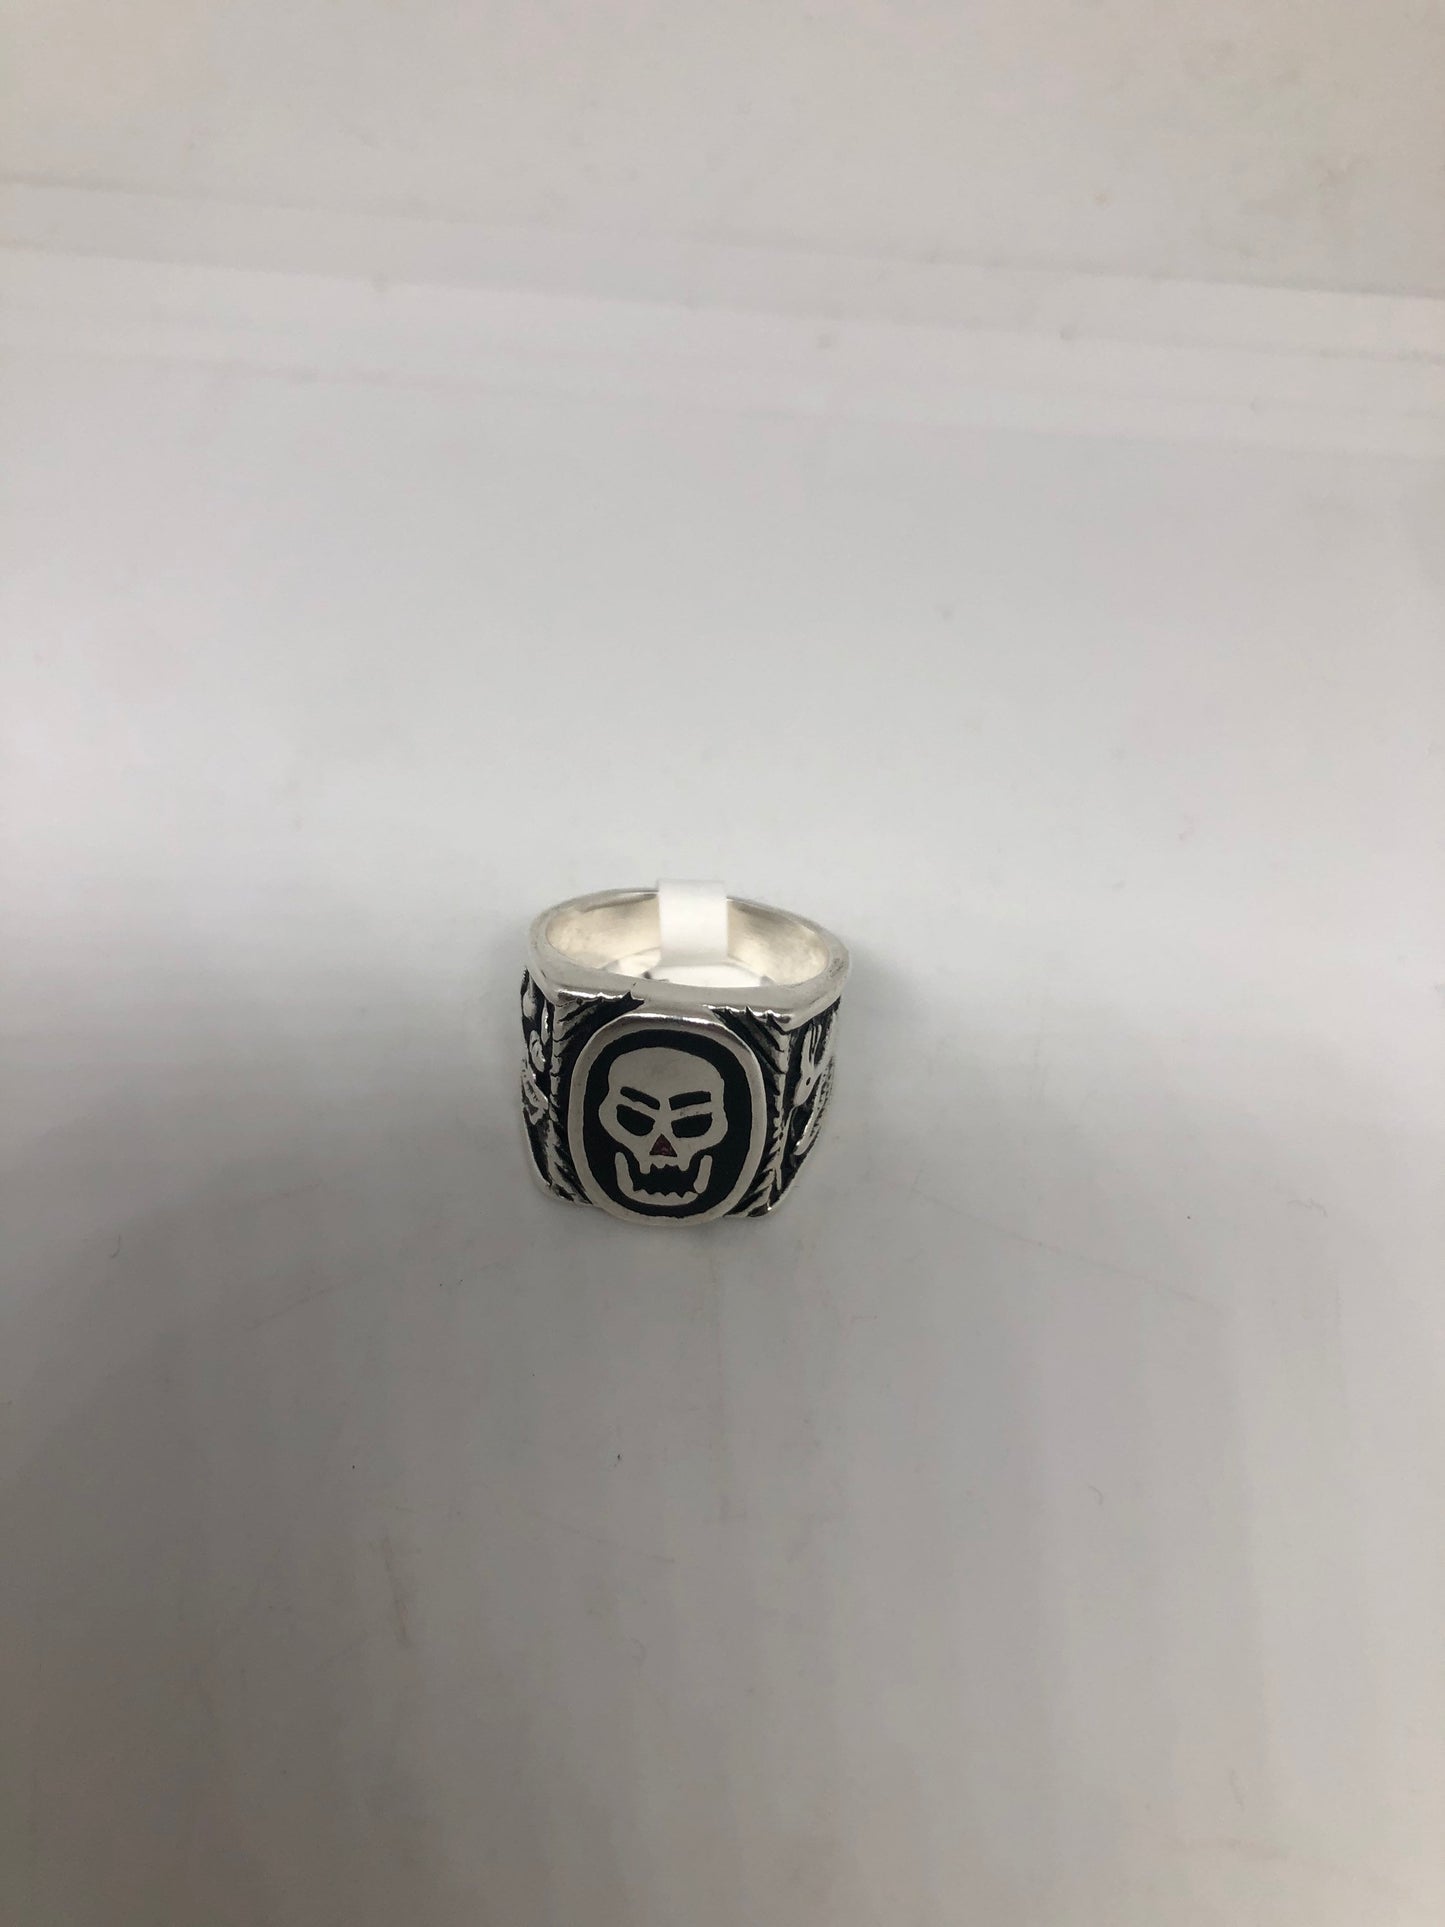 Vintage Southwestern Skull Ring in White Bronze with Black Stone Inlay